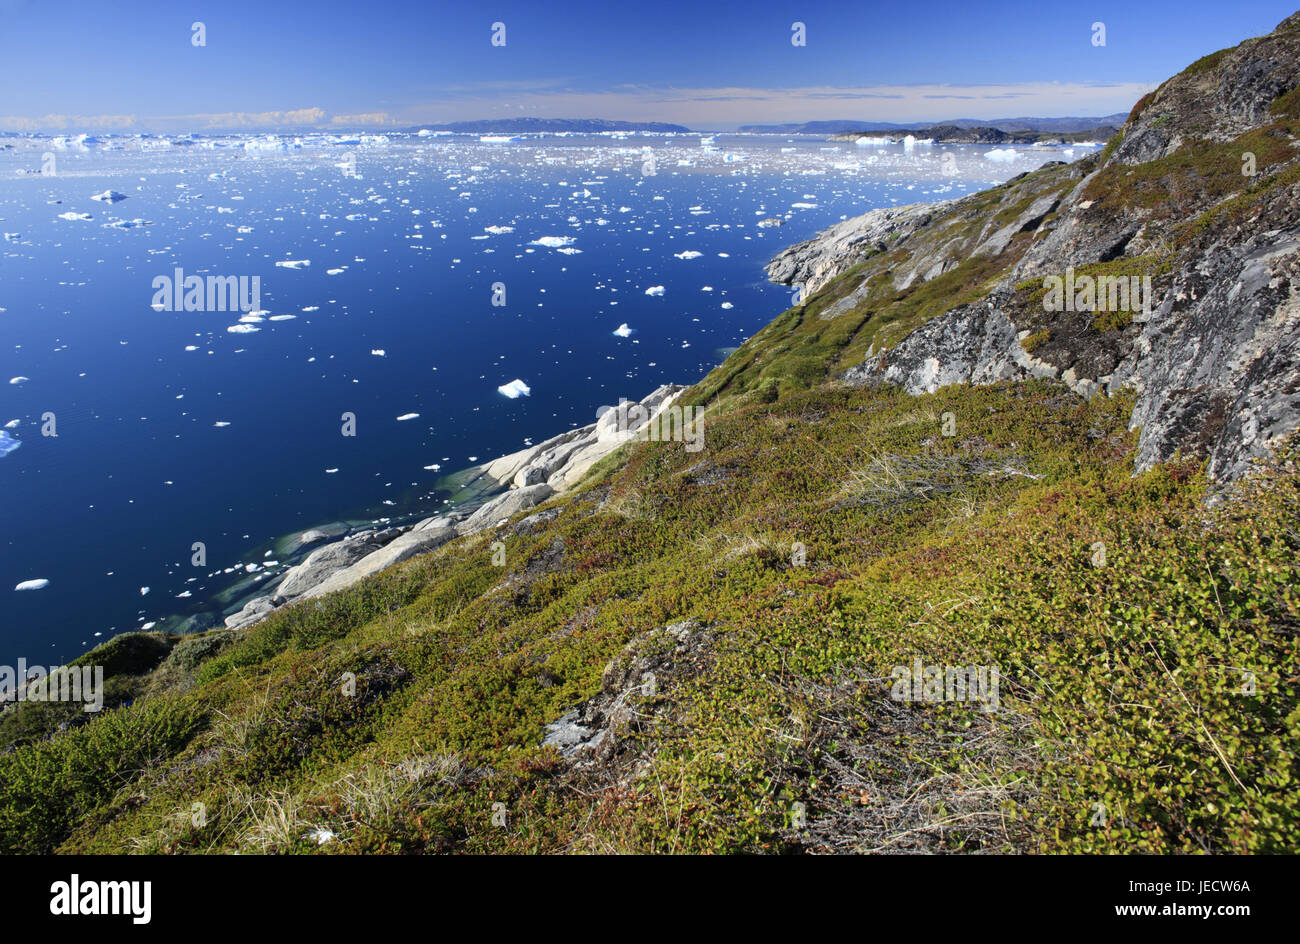 Greenland, Disco Bay, Ilulissat, fjord, drift ice, coastal scenery, detail, view, Western Greenland, ice, glacier, the Arctic, summer, loneliness, deserted, glacier ice, floes, icebergs, nature, climate change, mirroring, water surface, bile coast, covered, vegetation, plants, Stock Photo